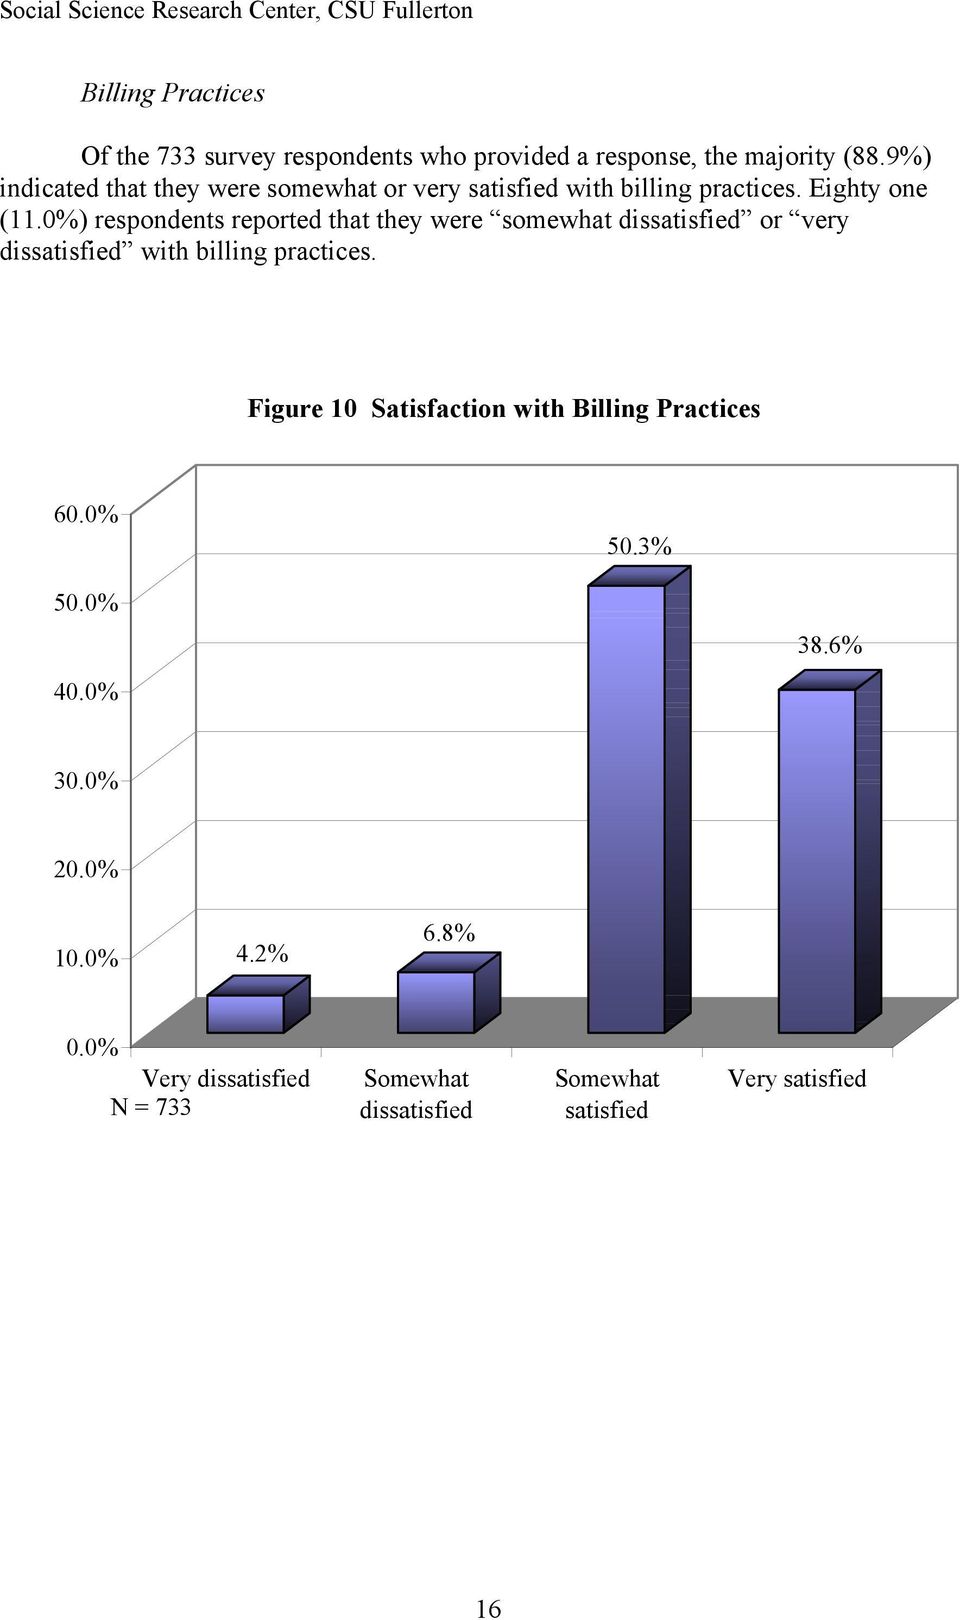 0%) respondents reported that they were somewhat dissatisfied or very dissatisfied with billing practices.